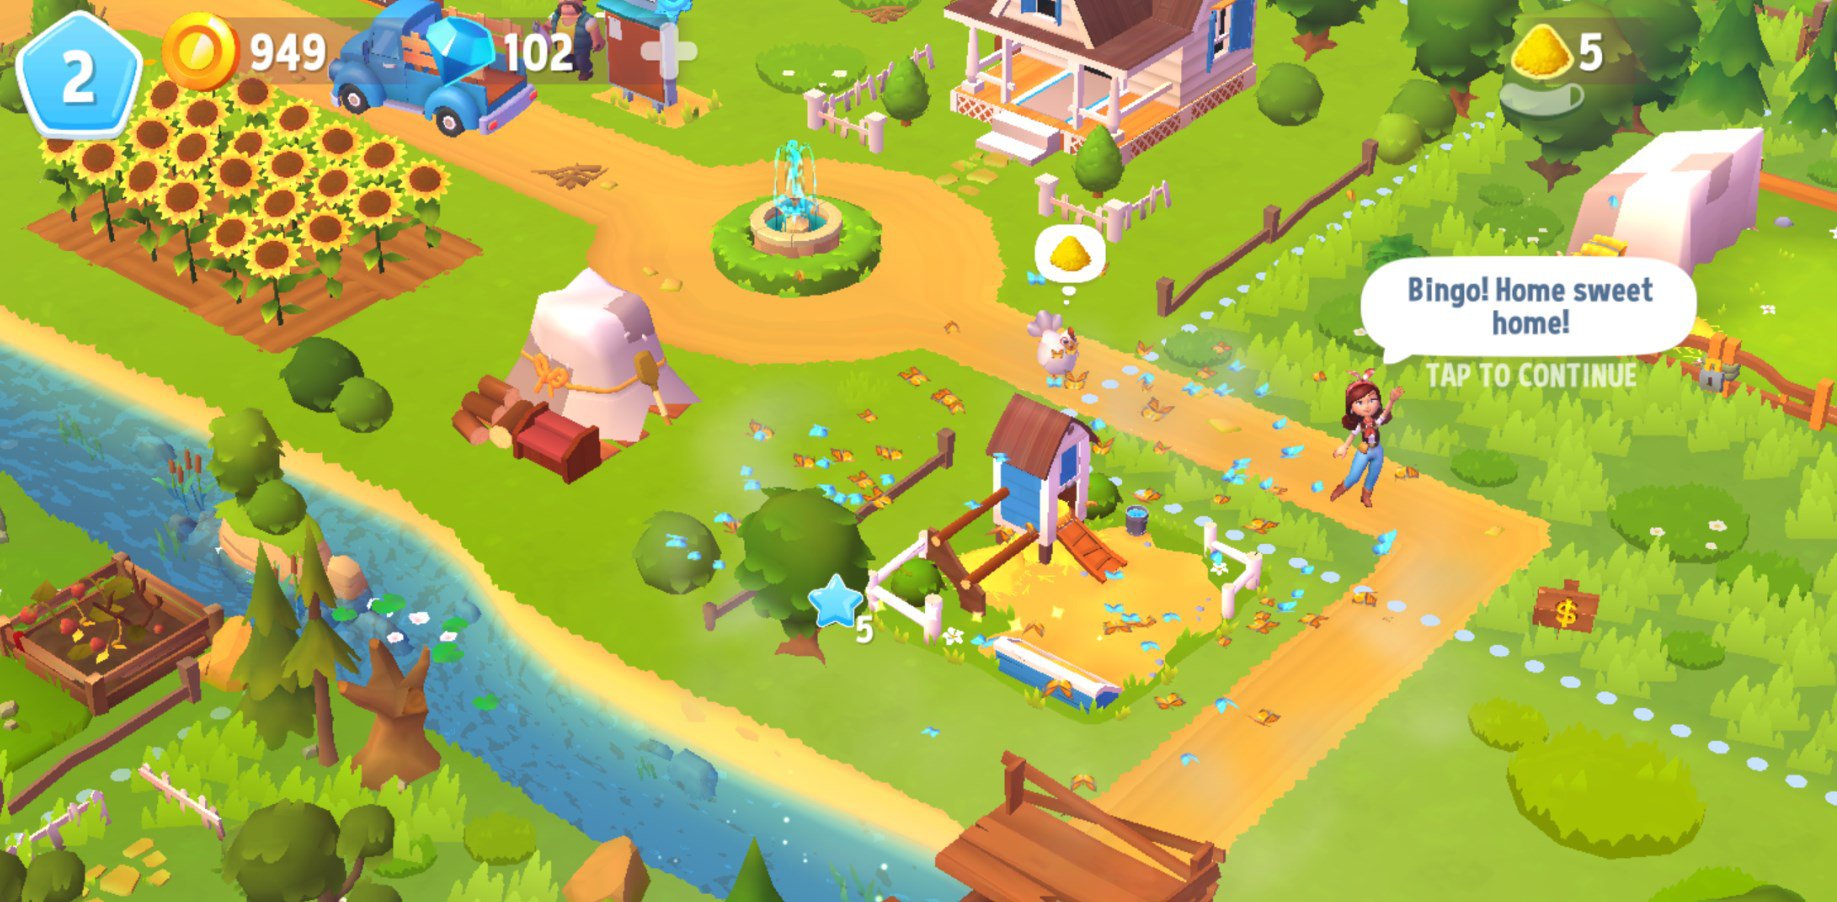 Farmville game download free for mobile phone